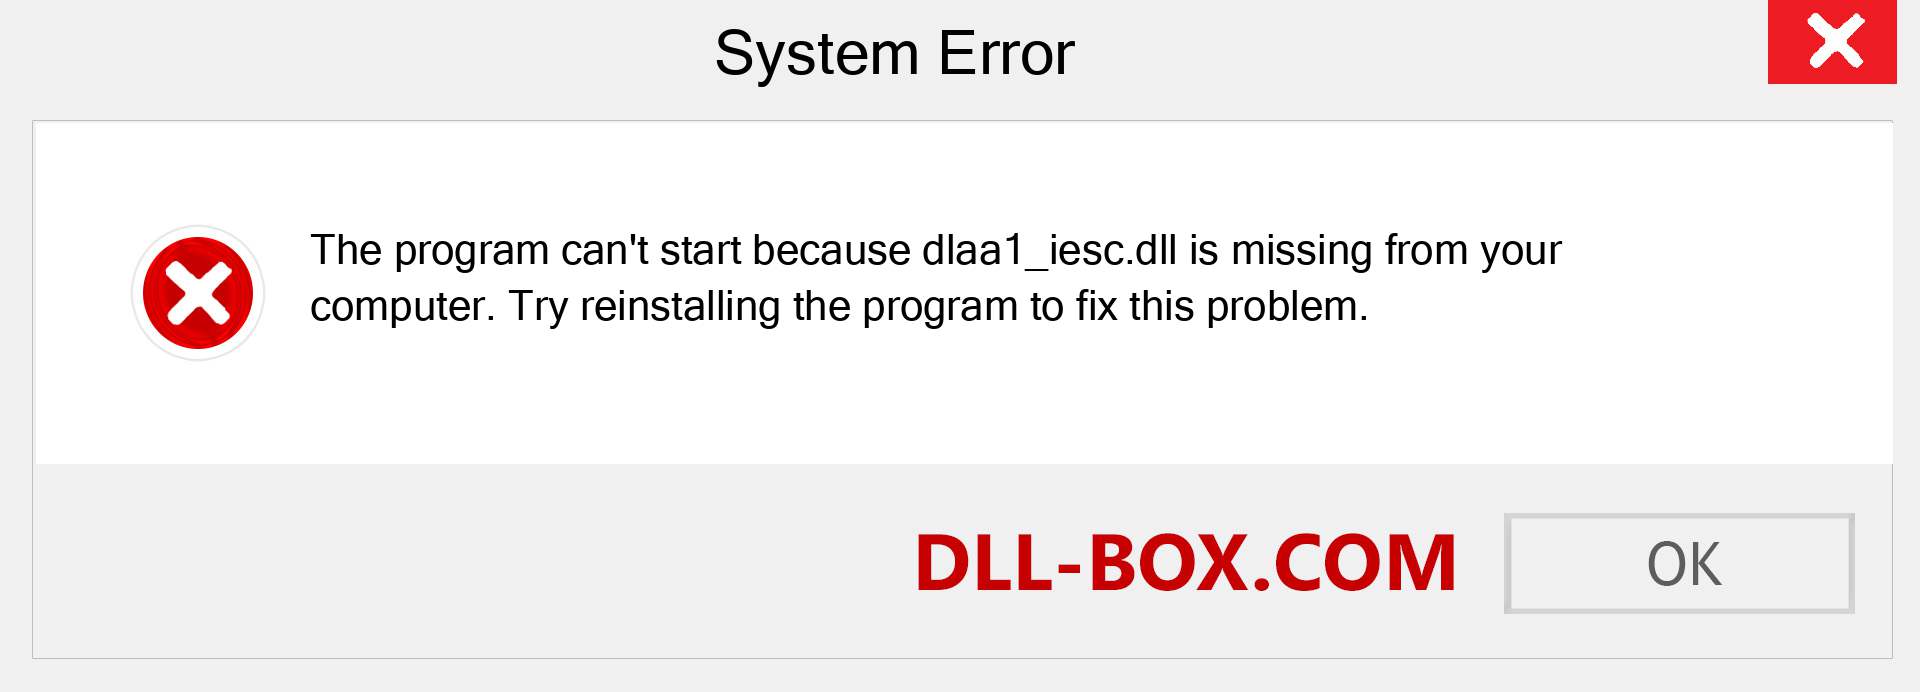  dlaa1_iesc.dll file is missing?. Download for Windows 7, 8, 10 - Fix  dlaa1_iesc dll Missing Error on Windows, photos, images